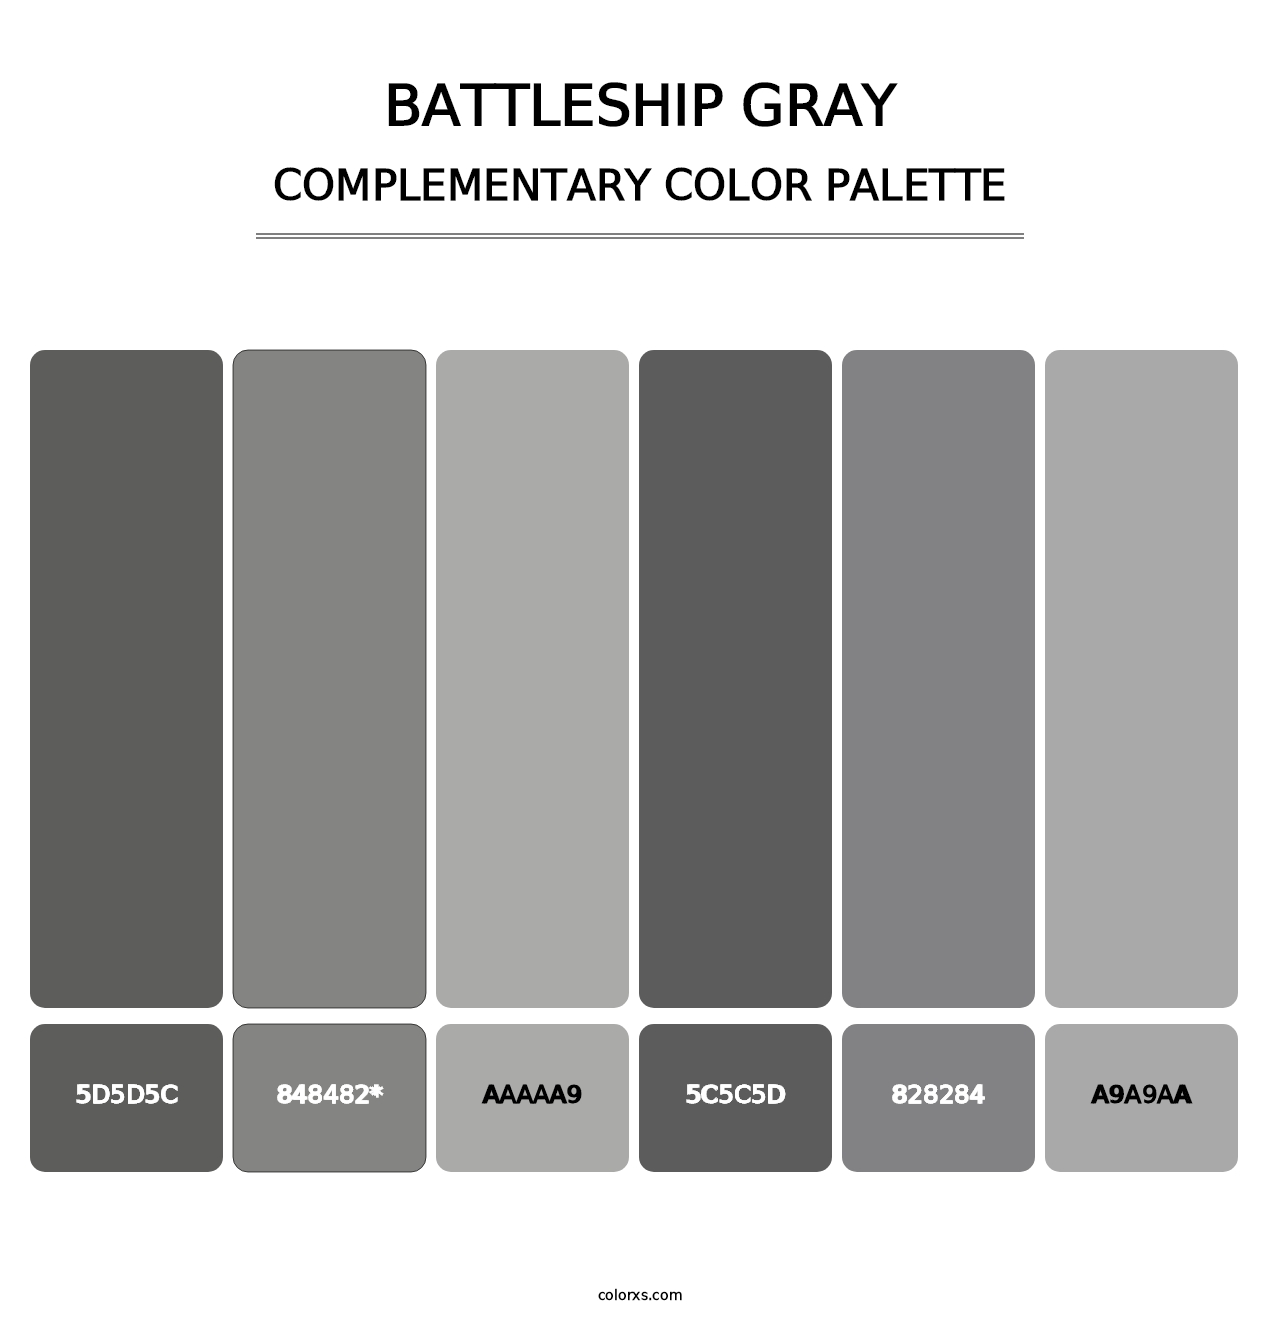 Battleship Gray - Complementary Color Palette